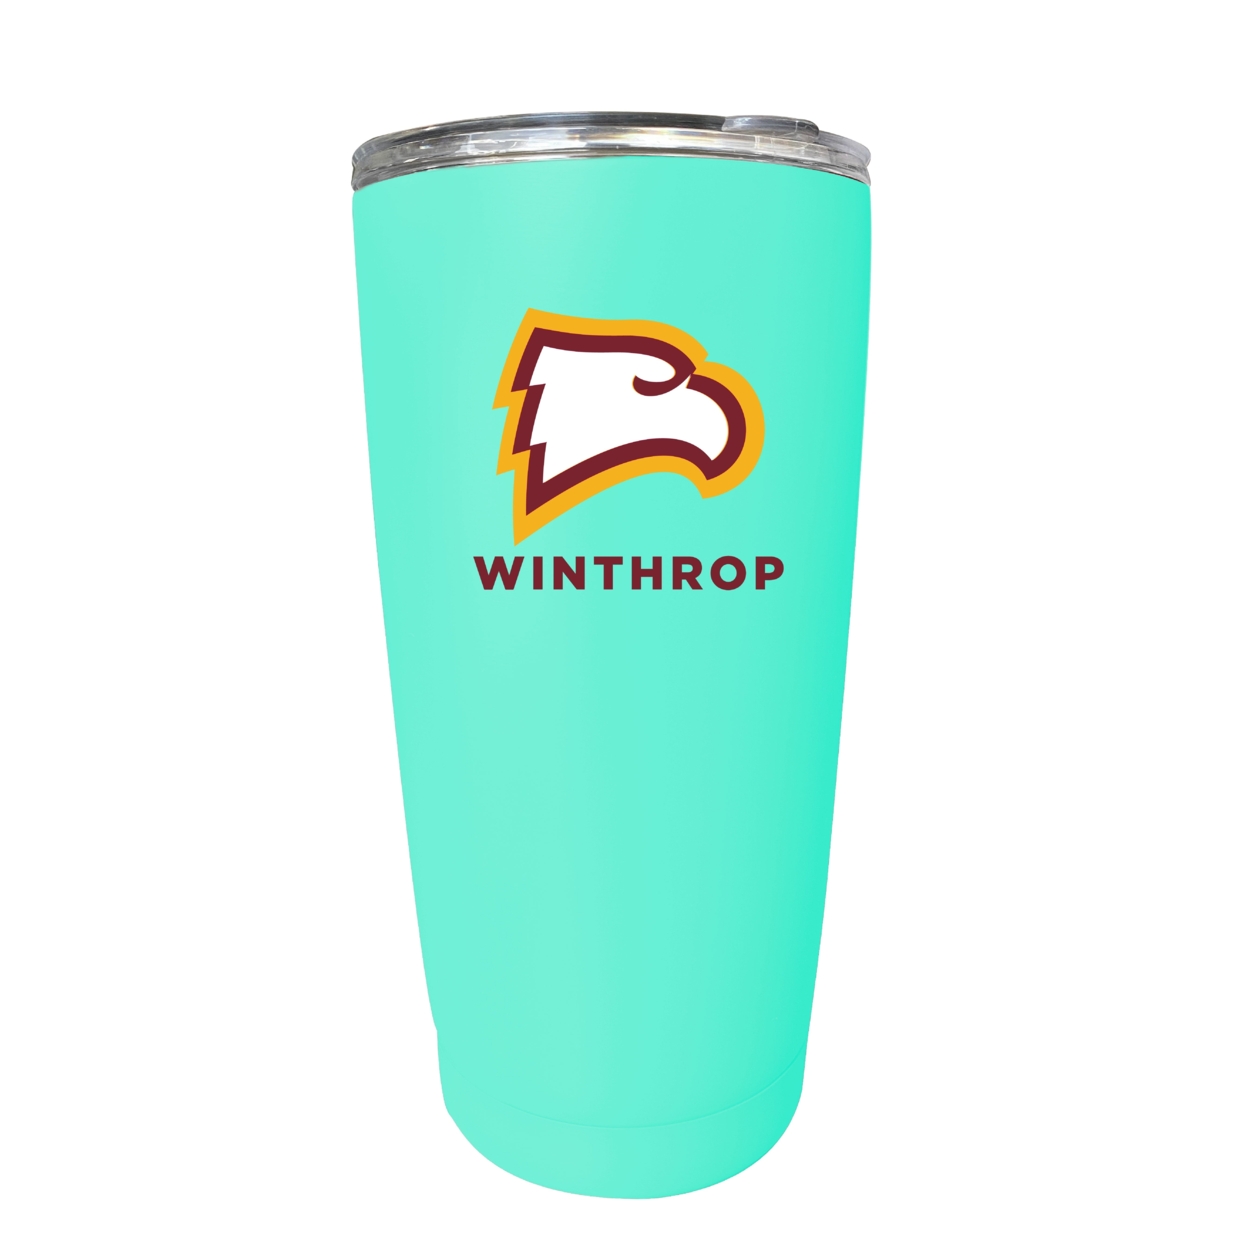 Winthrop University 16 Oz Insulated Stainless Steel Tumblers - Choose Your Color - Red